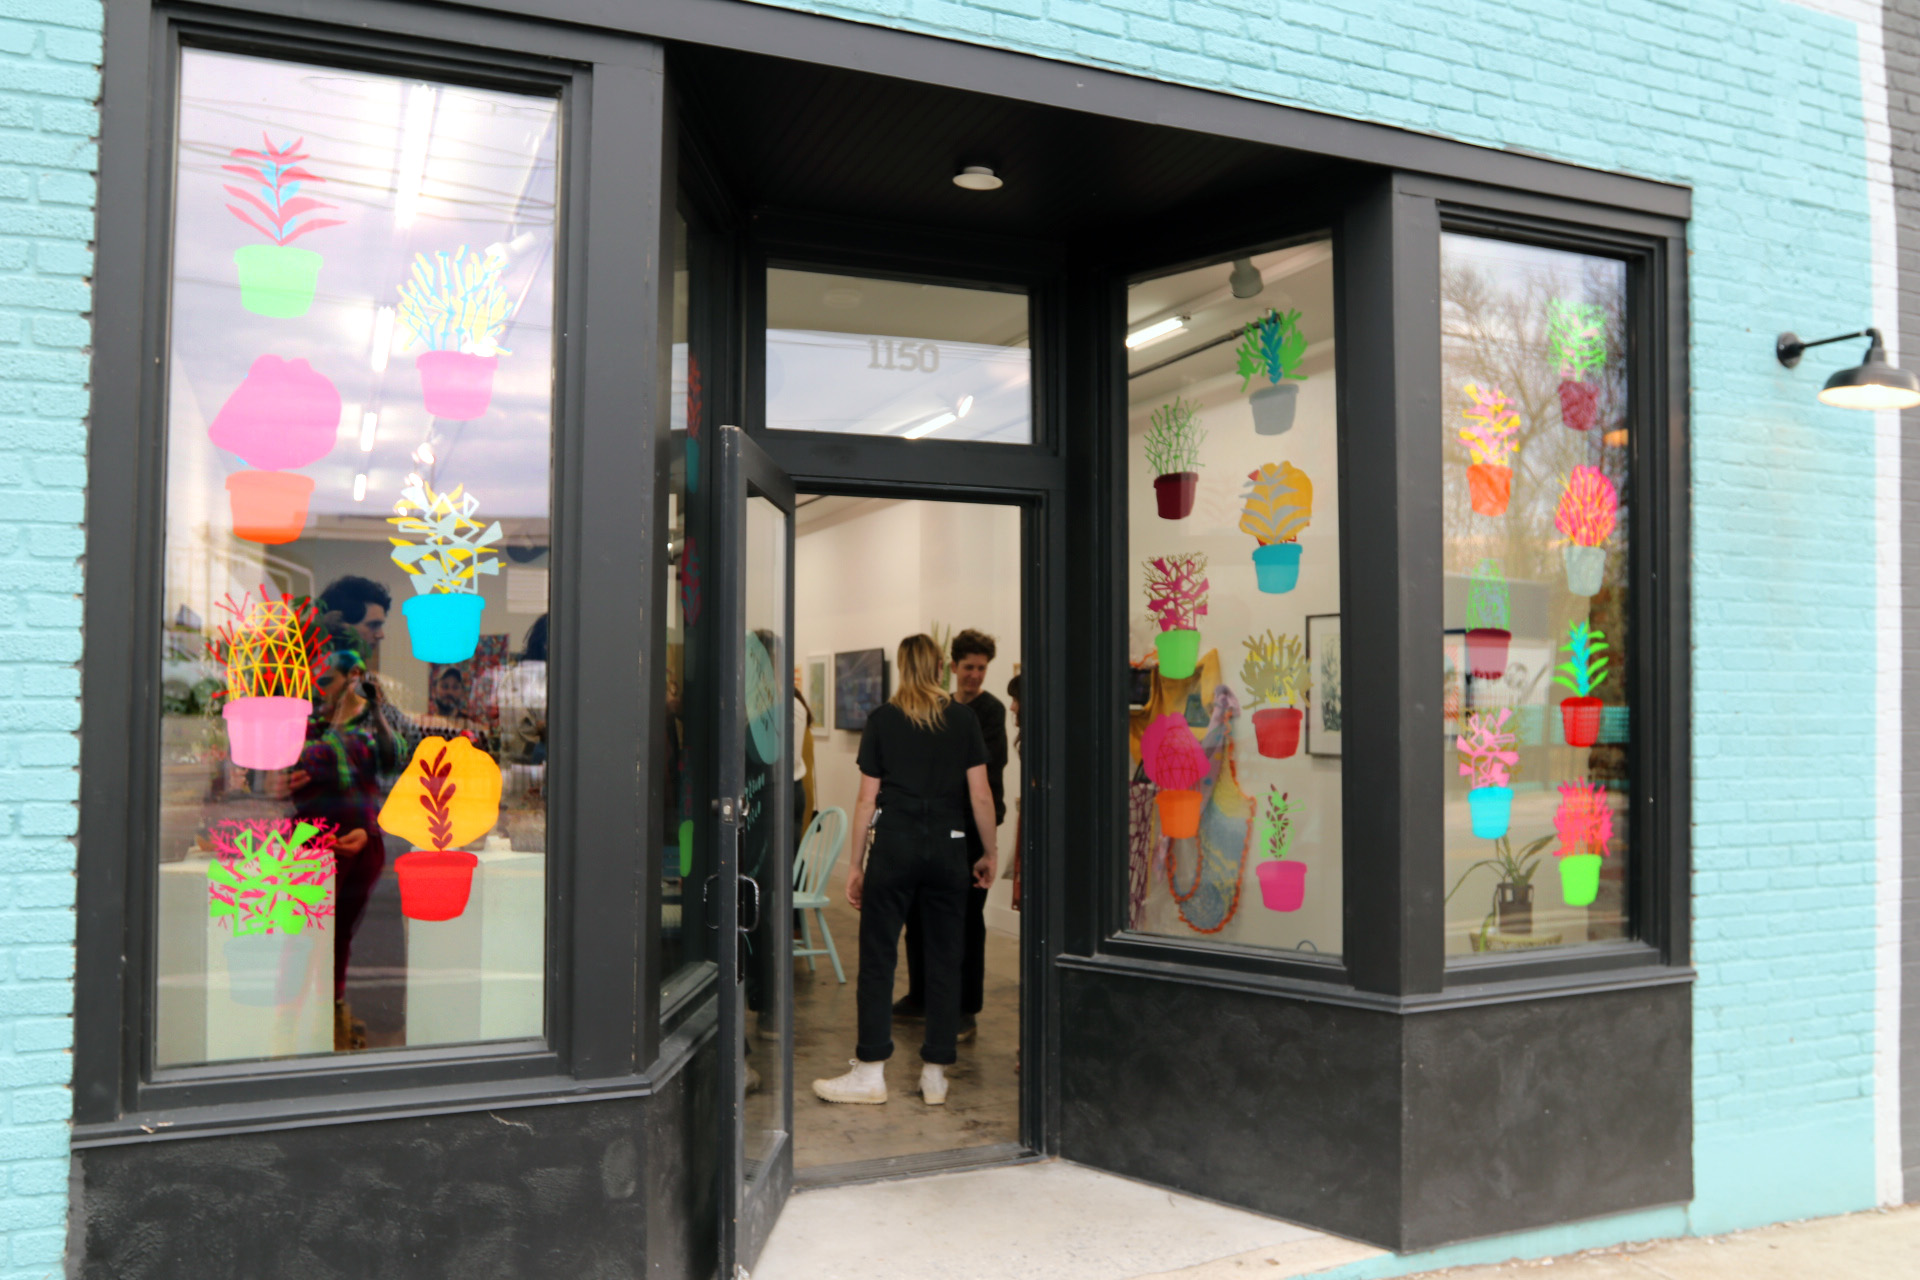 The front of the gallery decorated with vinyl stickers of plants